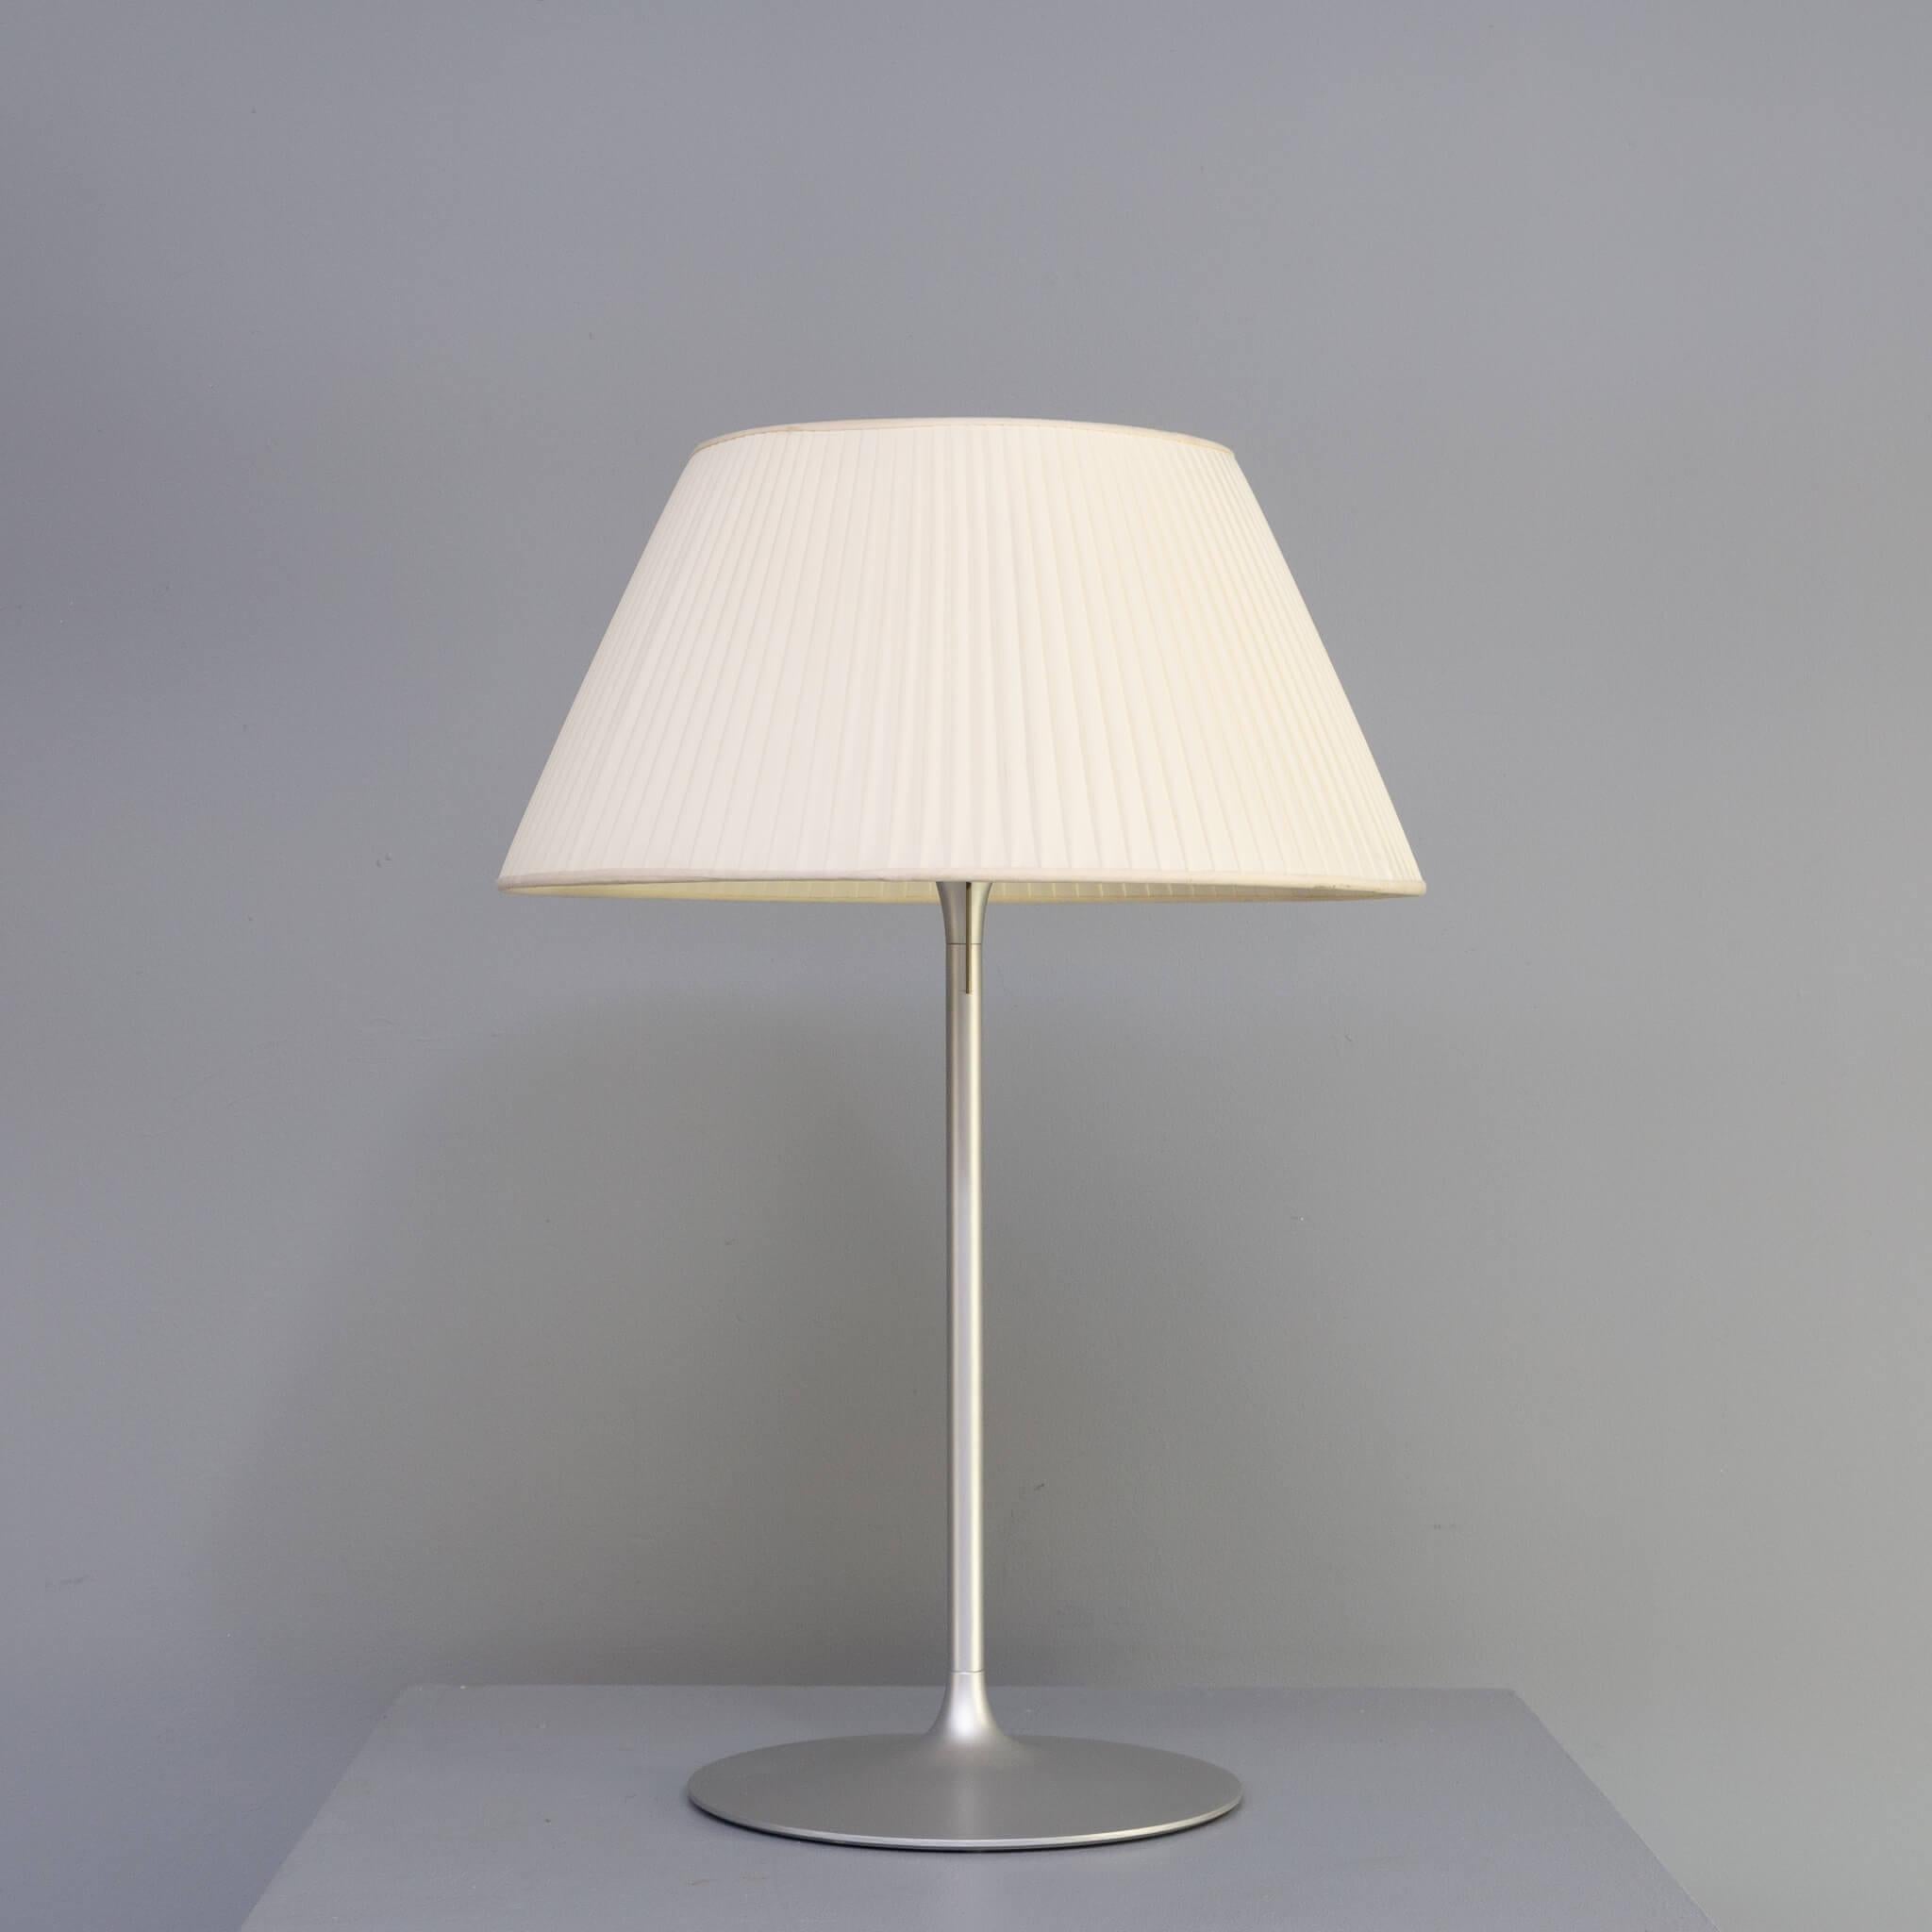 Philippe Starck designed the Romeo series of table lamps specially for Flos (meaning Flower in Italian). The lamp has been delivered in different versions in size but also in different hoods, There are lamps with glass hoods and fabric shades. This